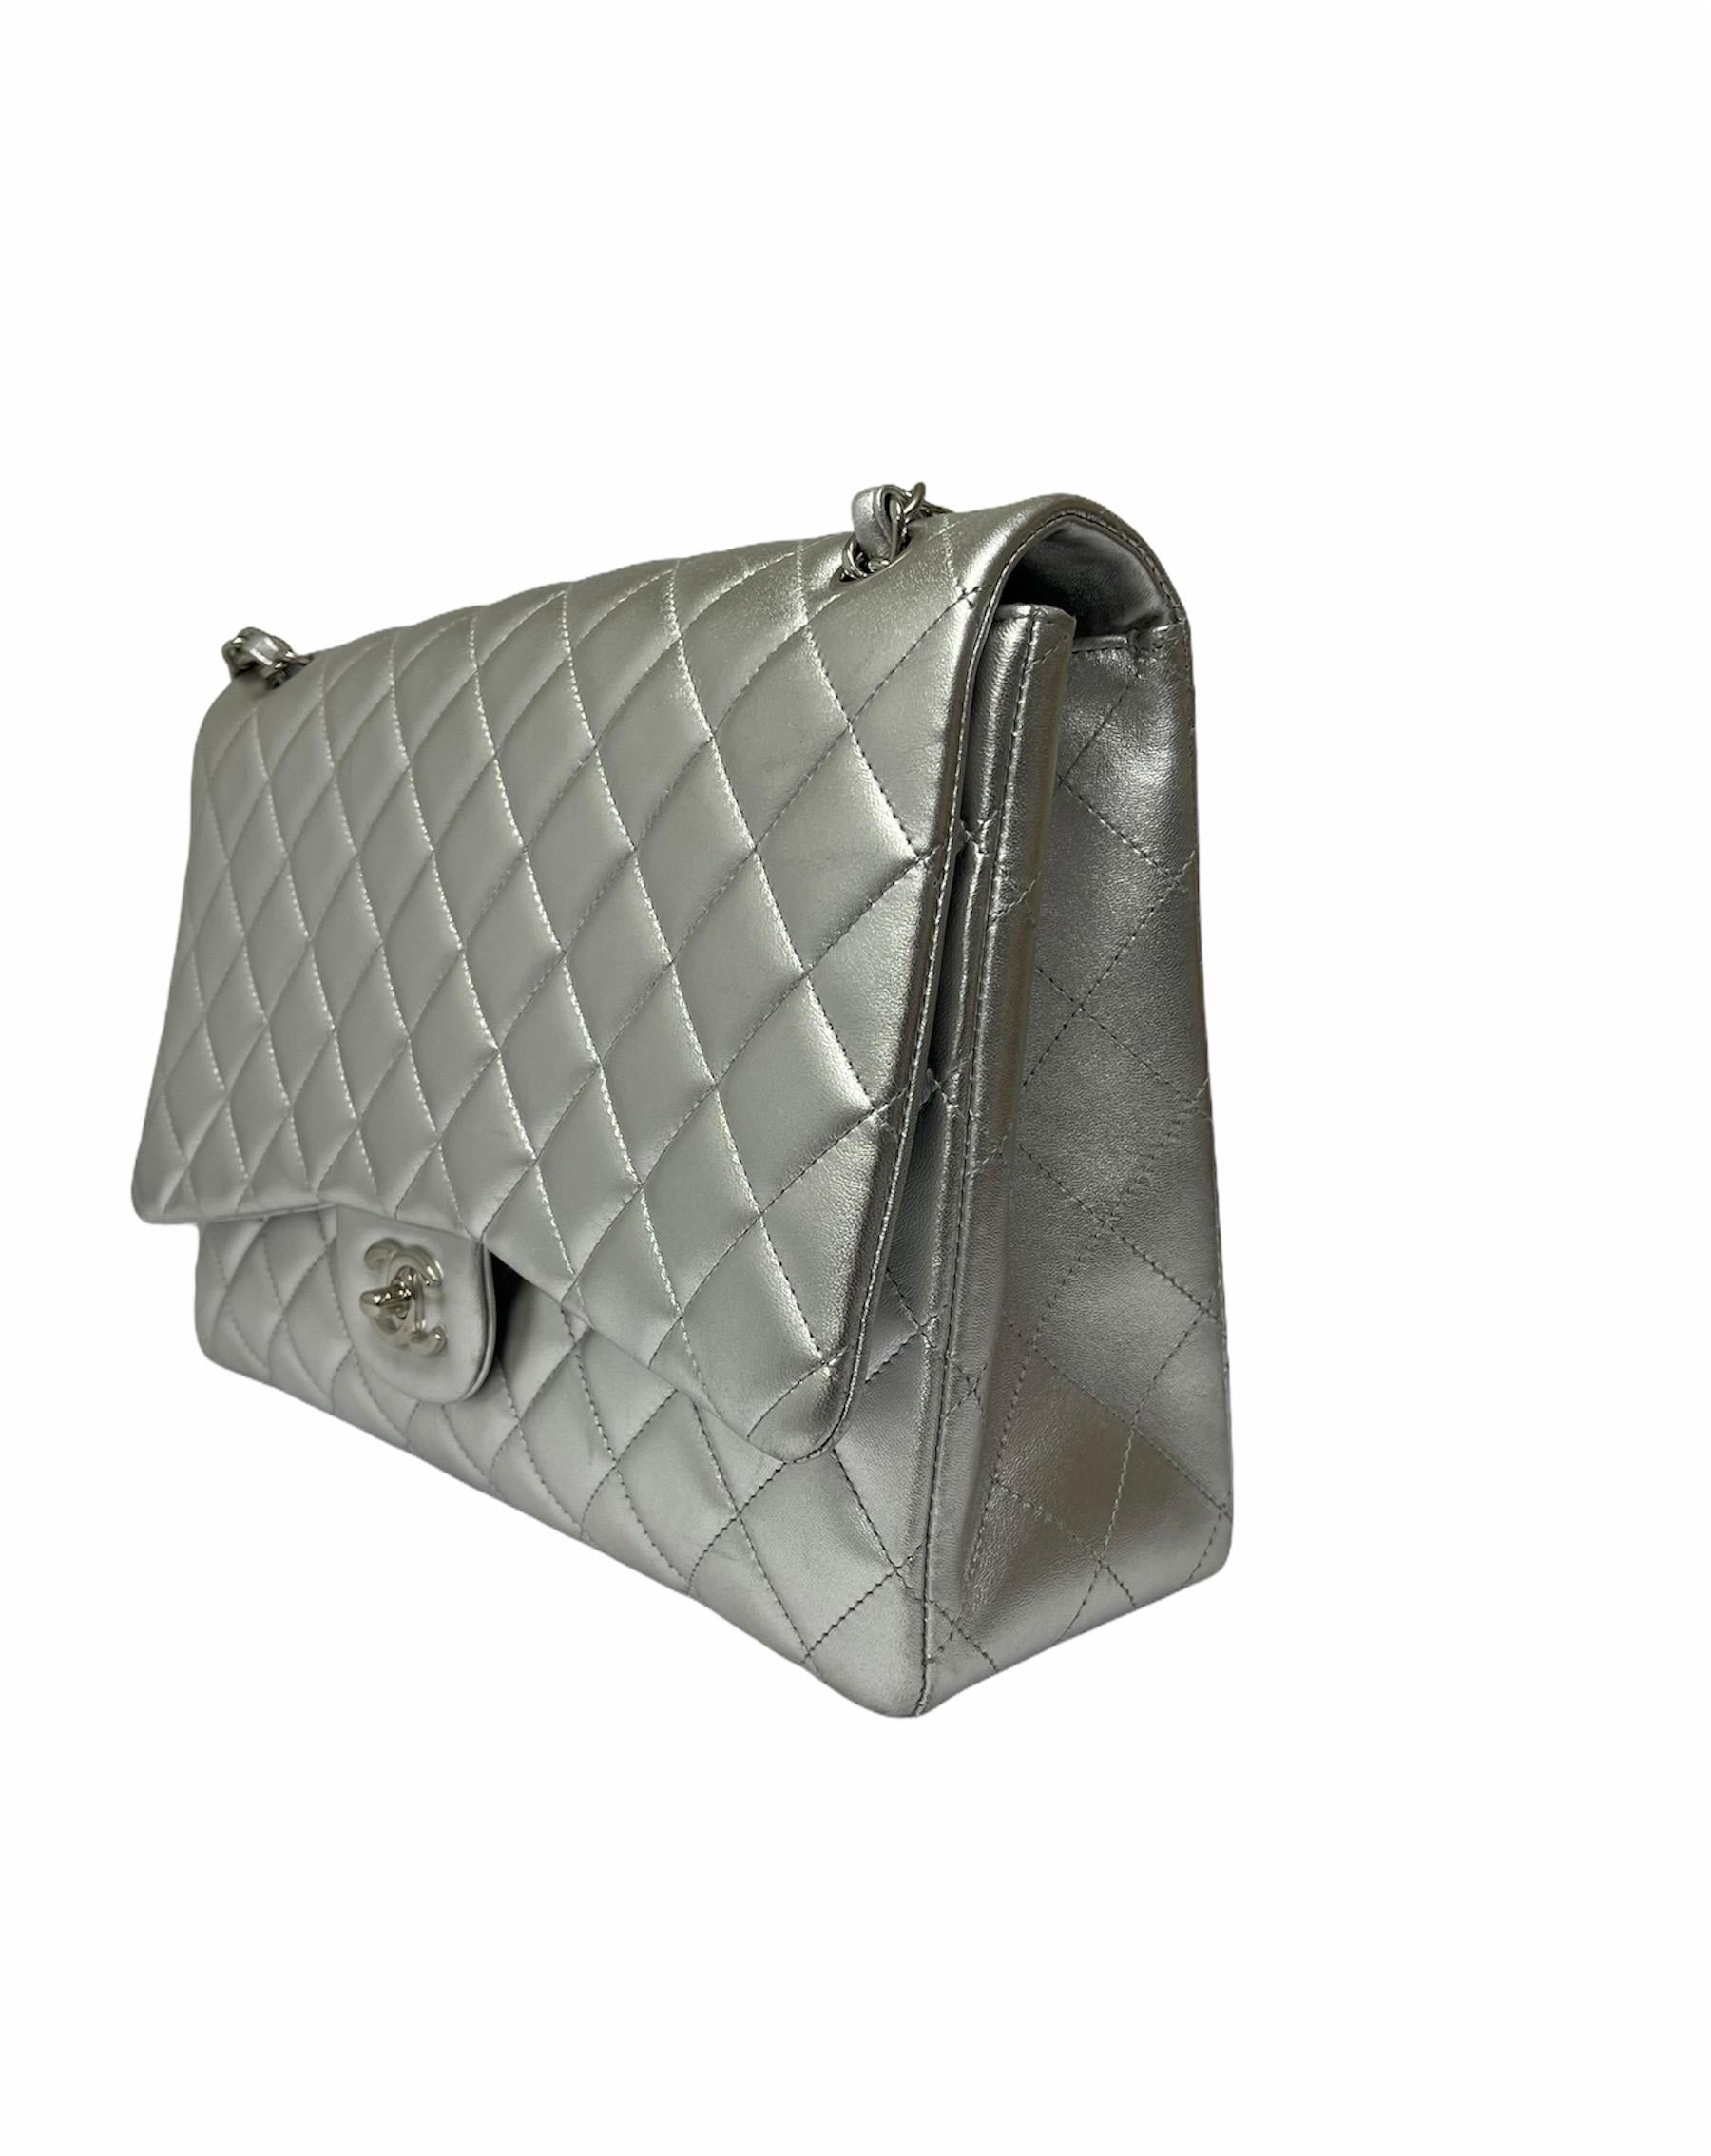 Chanel signed bag, Maxi Jumbo model, made of silver quilted leather with silver hardware. Equipped with an interlocking closure, internally lined in silver leather, very roomy. Equipped with a sliding shoulder strap in leather and chain, a back